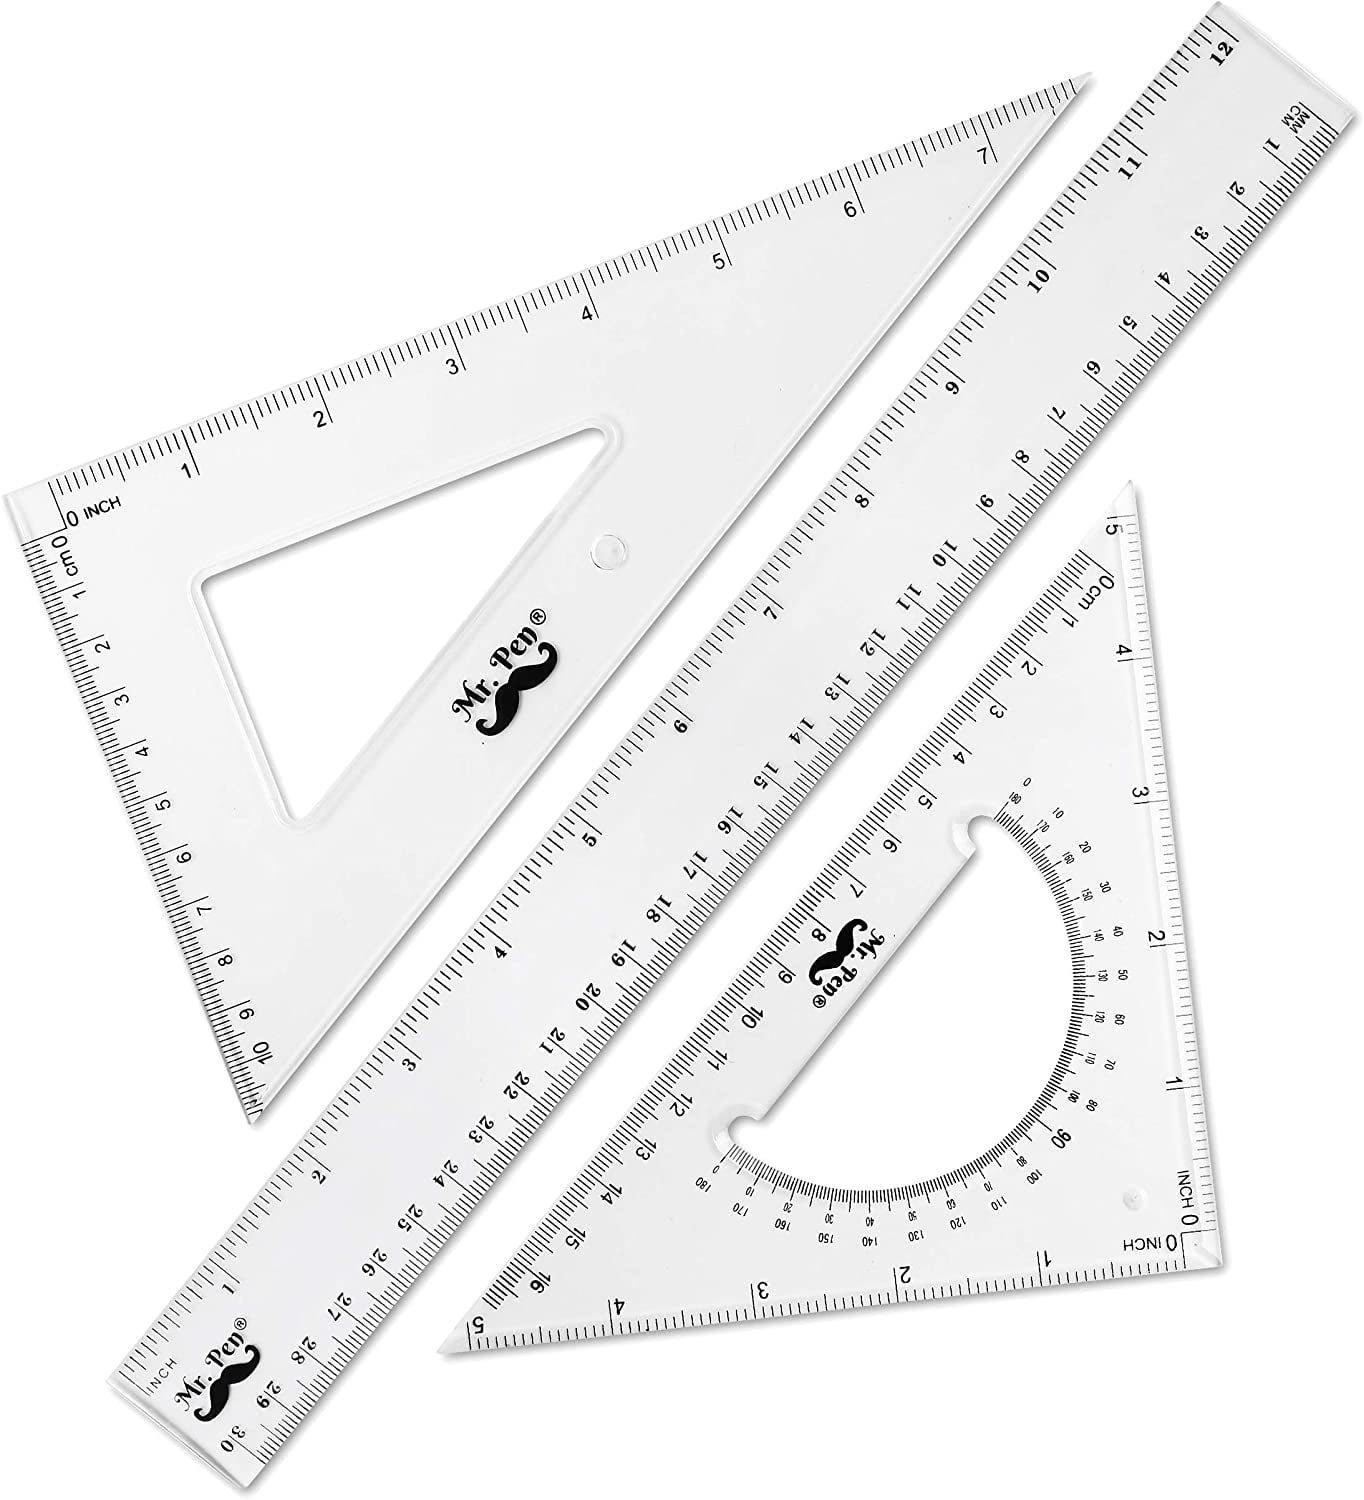 Maped Geometric Triangle Ruler 30°-60° Degree 21 cm - The Oil Paint Store